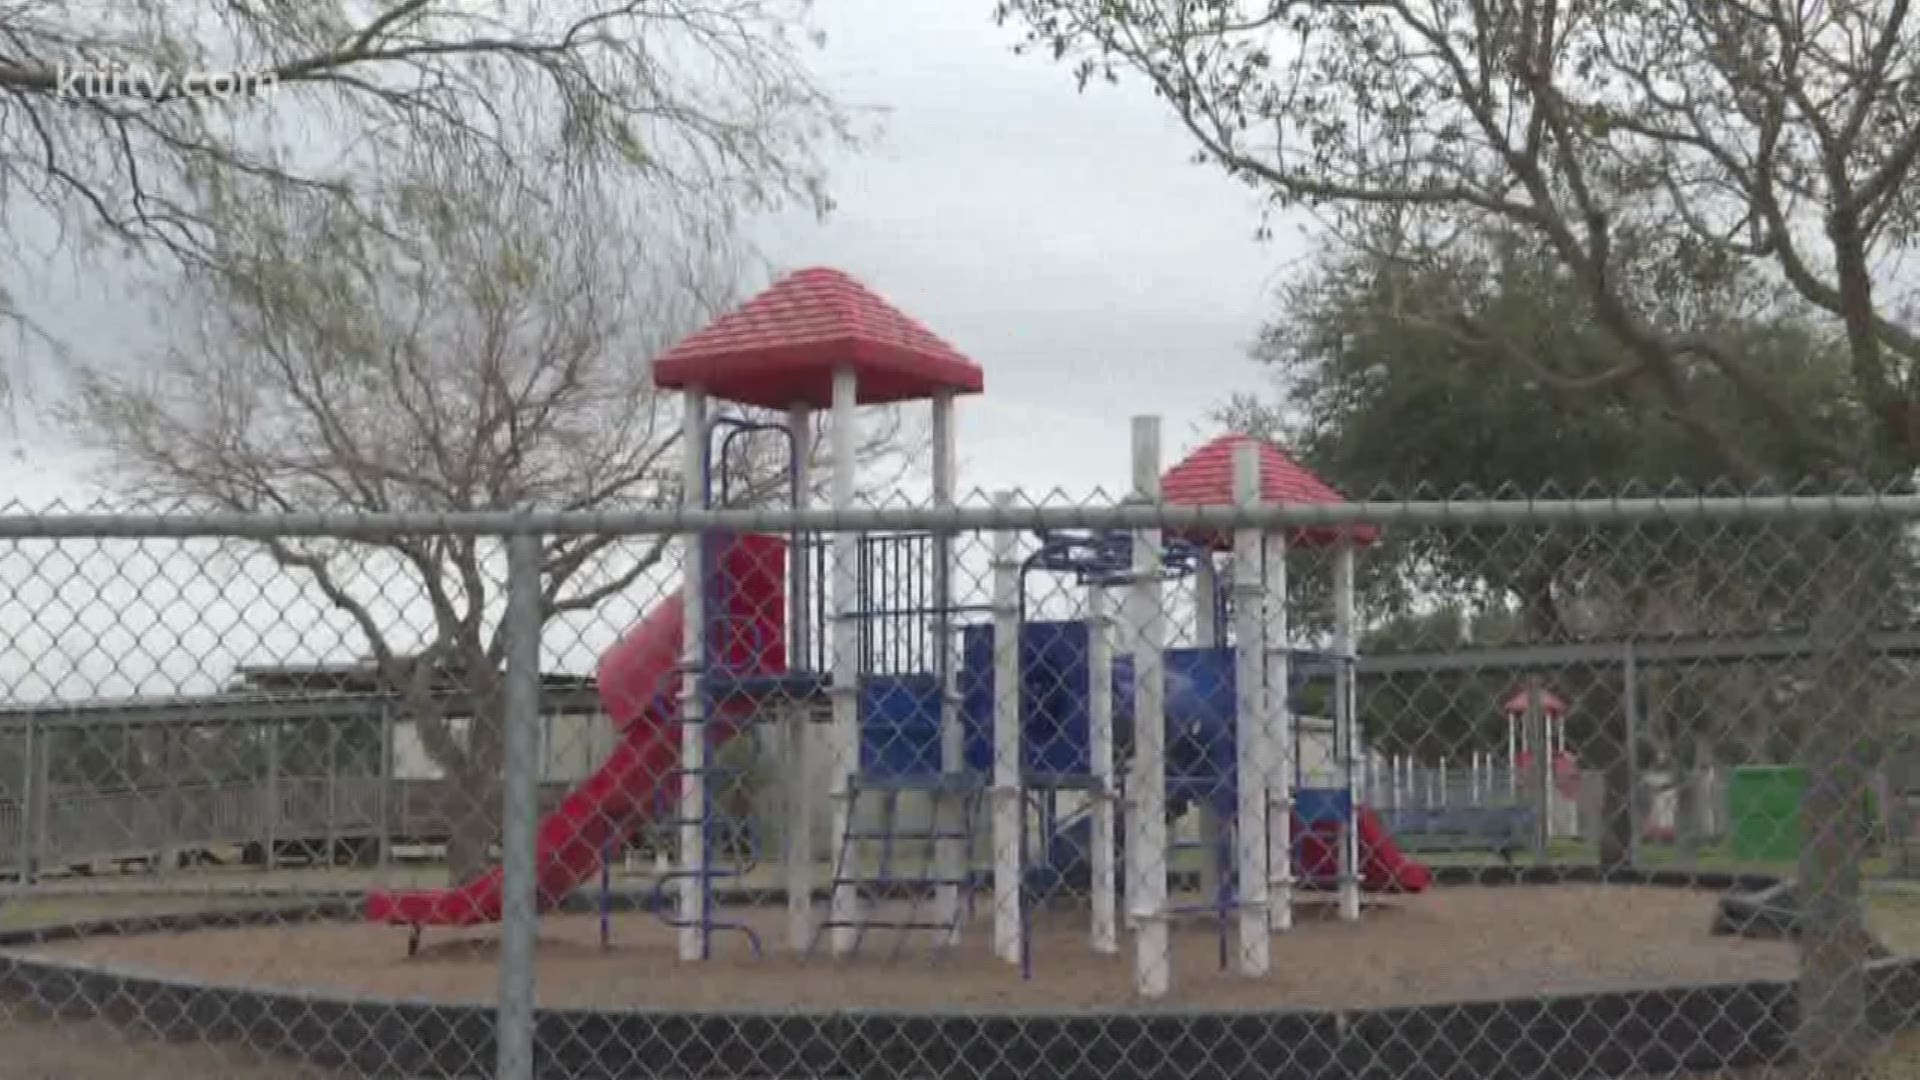 There has been increased security at Sanders Elementary School since a student reported an incident with a stranger after school Monday, according to Corpus Christi Independent School District police.